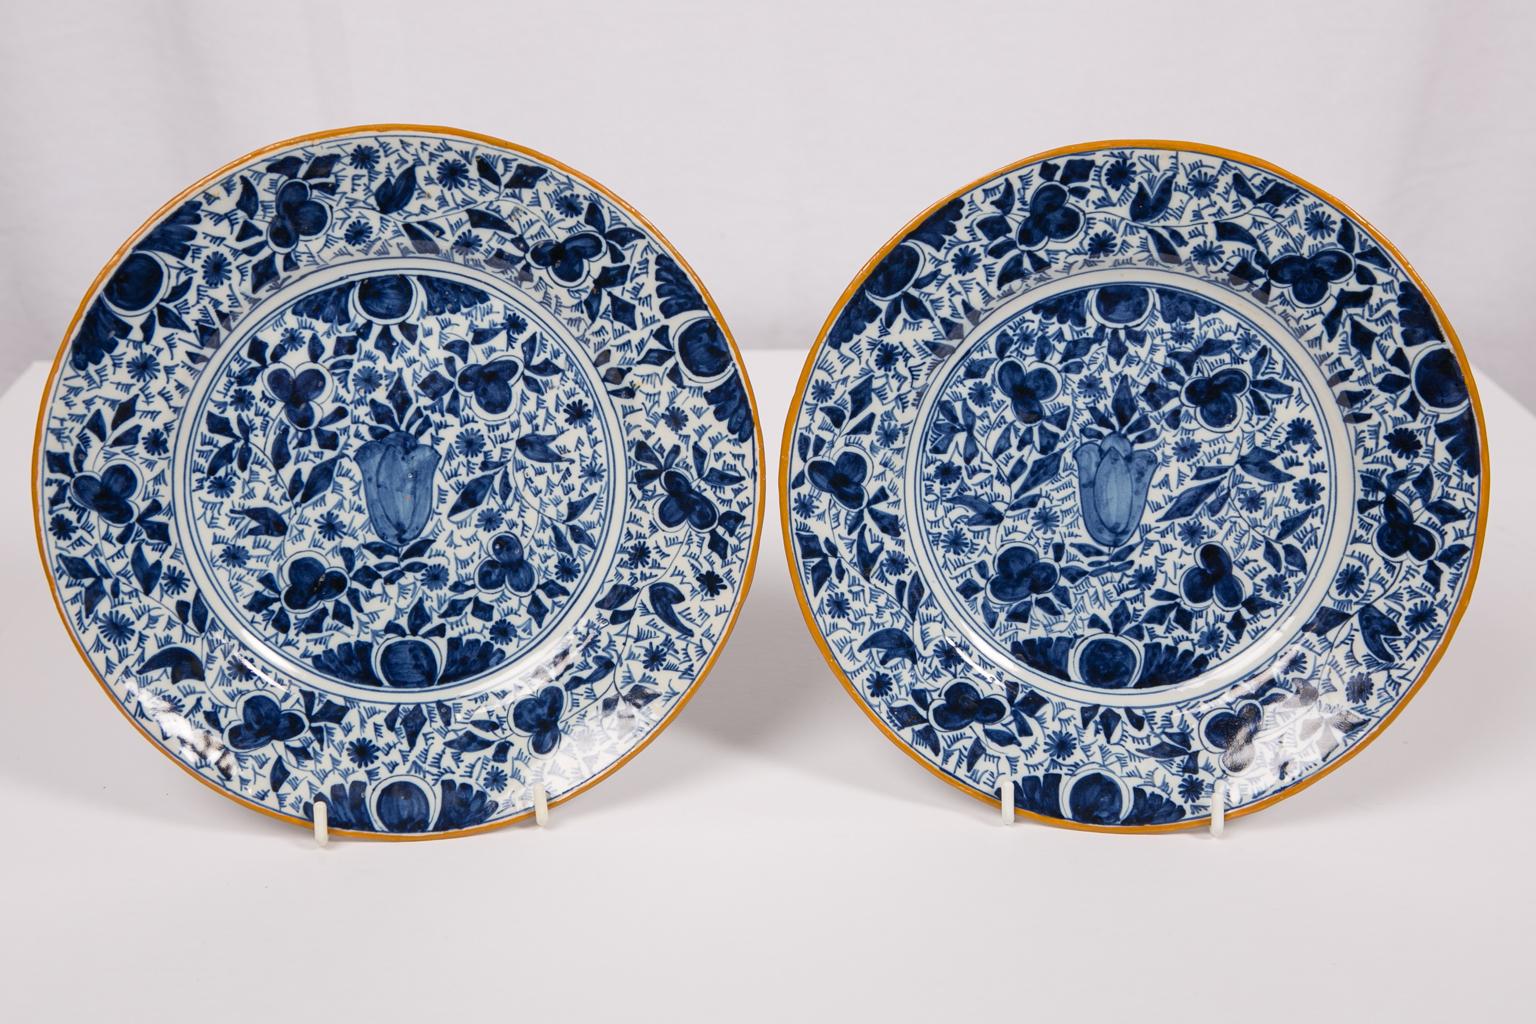 We are pleased to offer this pair of antique Delft blue and white plates which are hand-painted with a central tulip bulb and an overall pattern of flowers and leaves. The edge is painted with ochre colored slip. The ochre colored edge brings life